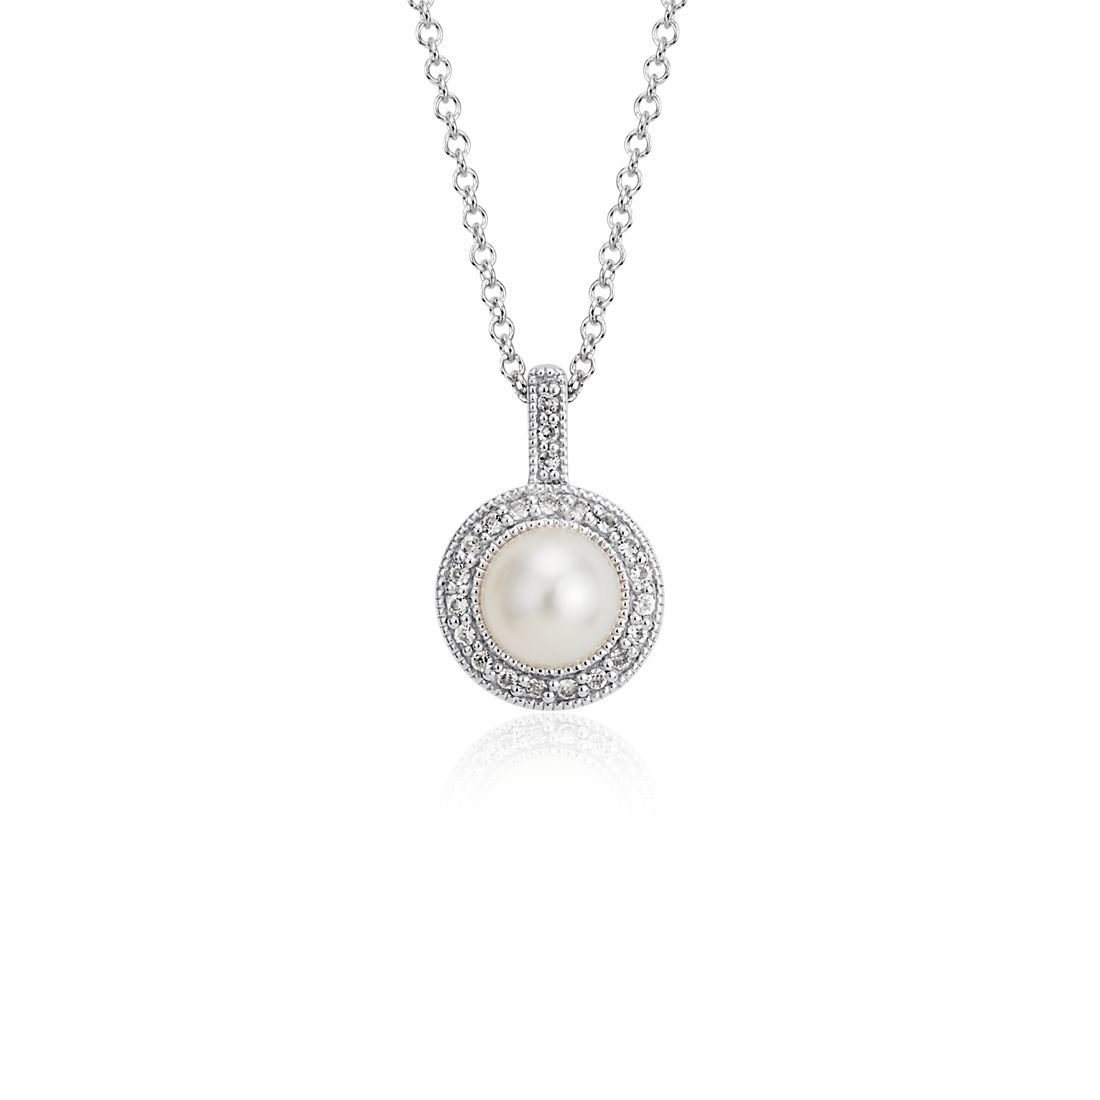 Vintage White gold diamond and pearl pendant necklace